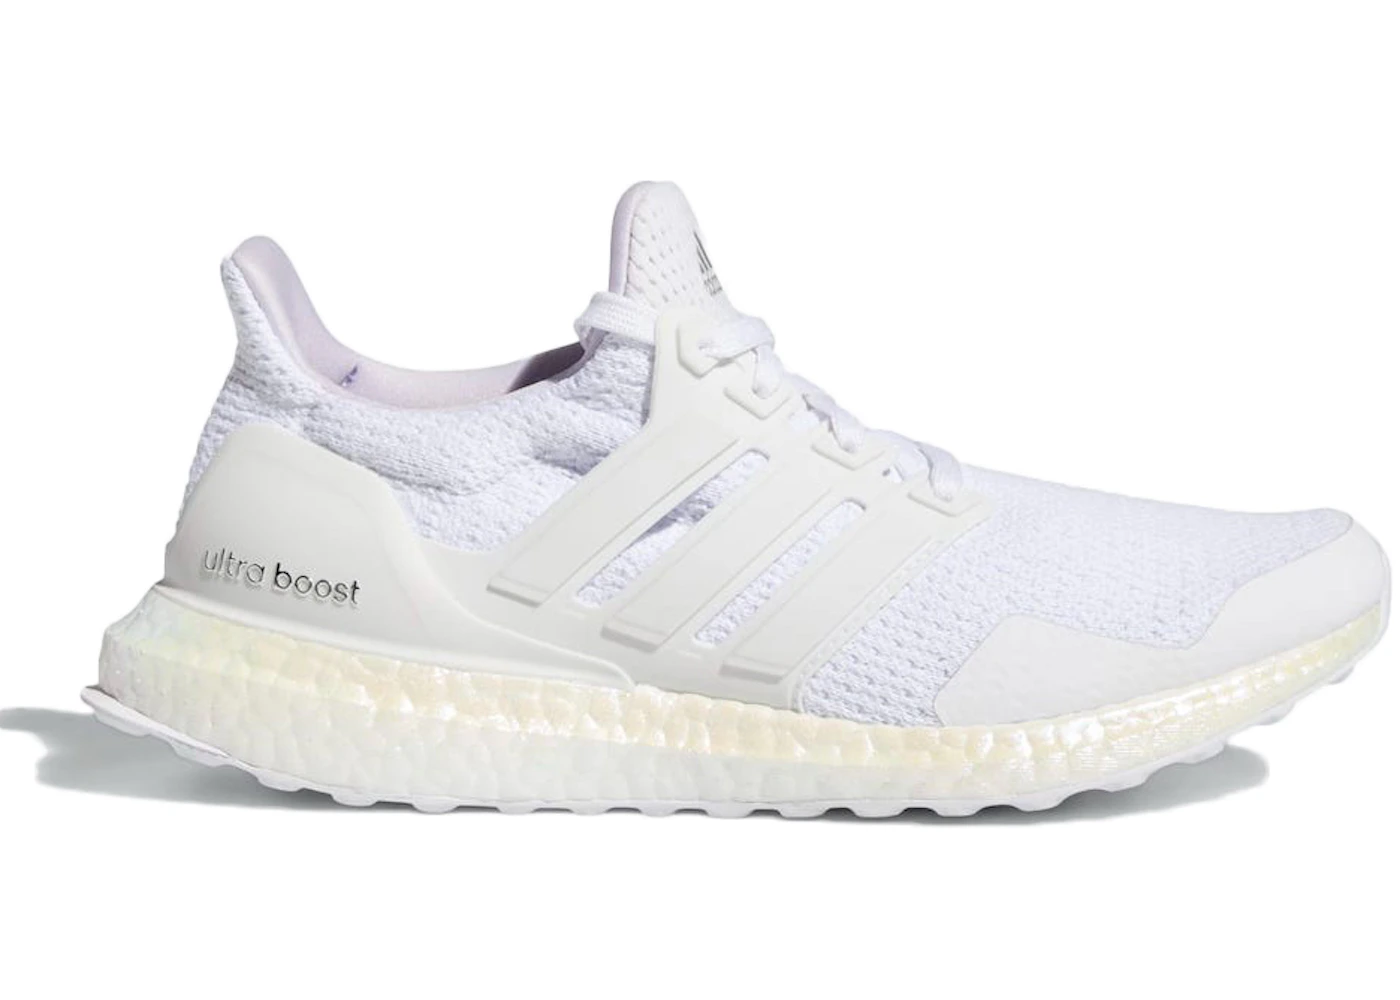 adidas Ultra Boost DNA White Iridescent (Women's) - FY2898 - US